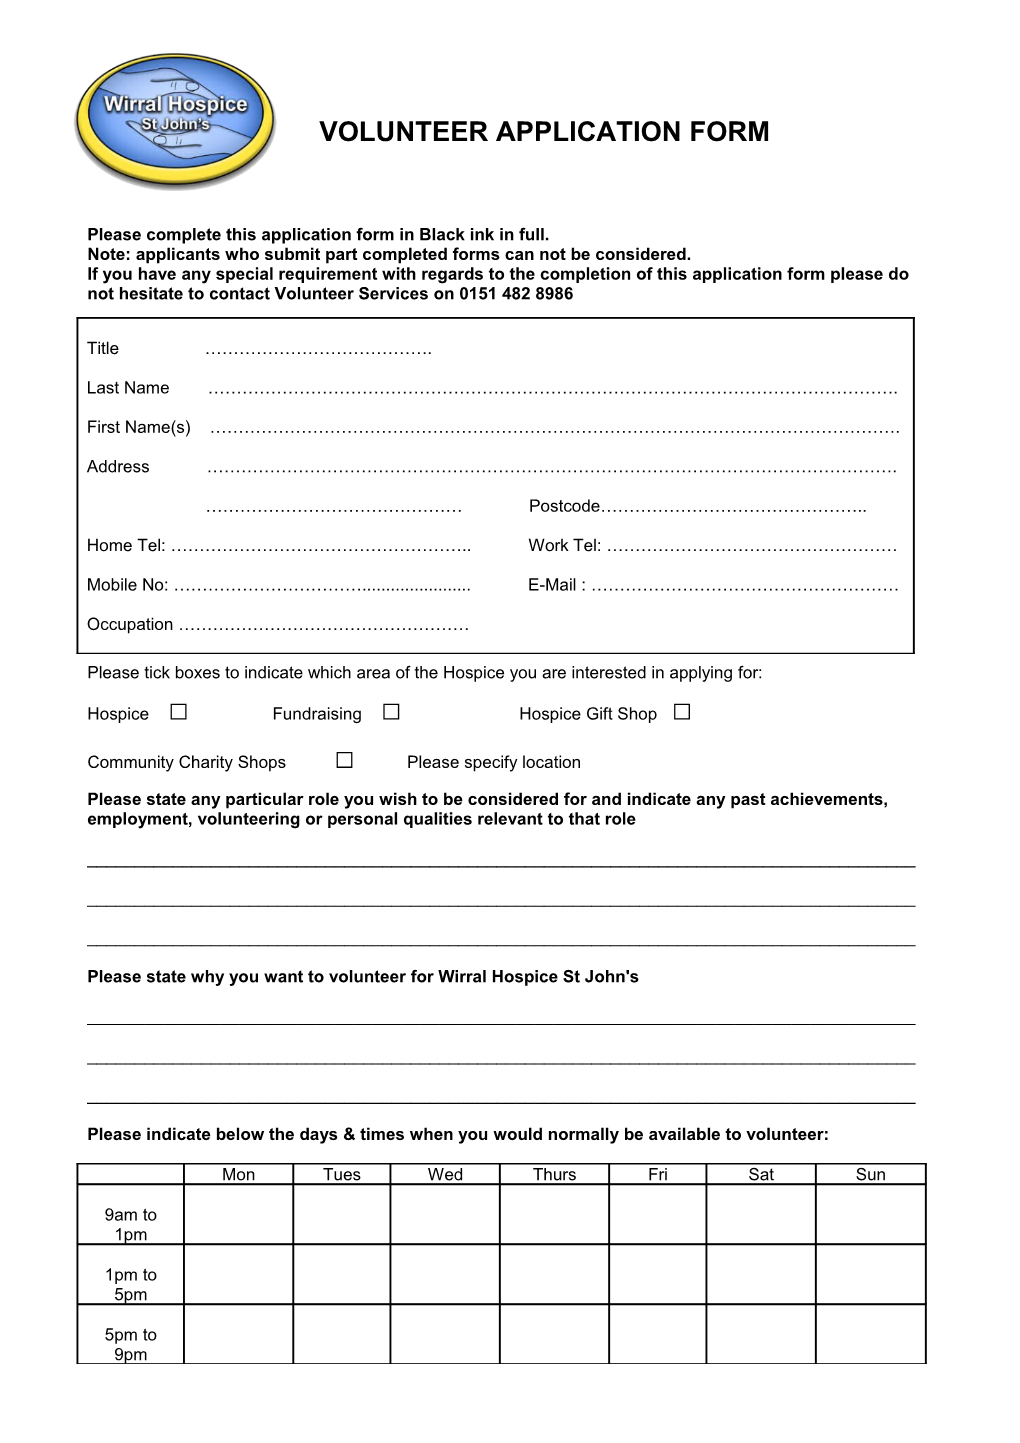 Please Complete This Application Form in Black Ink in Full